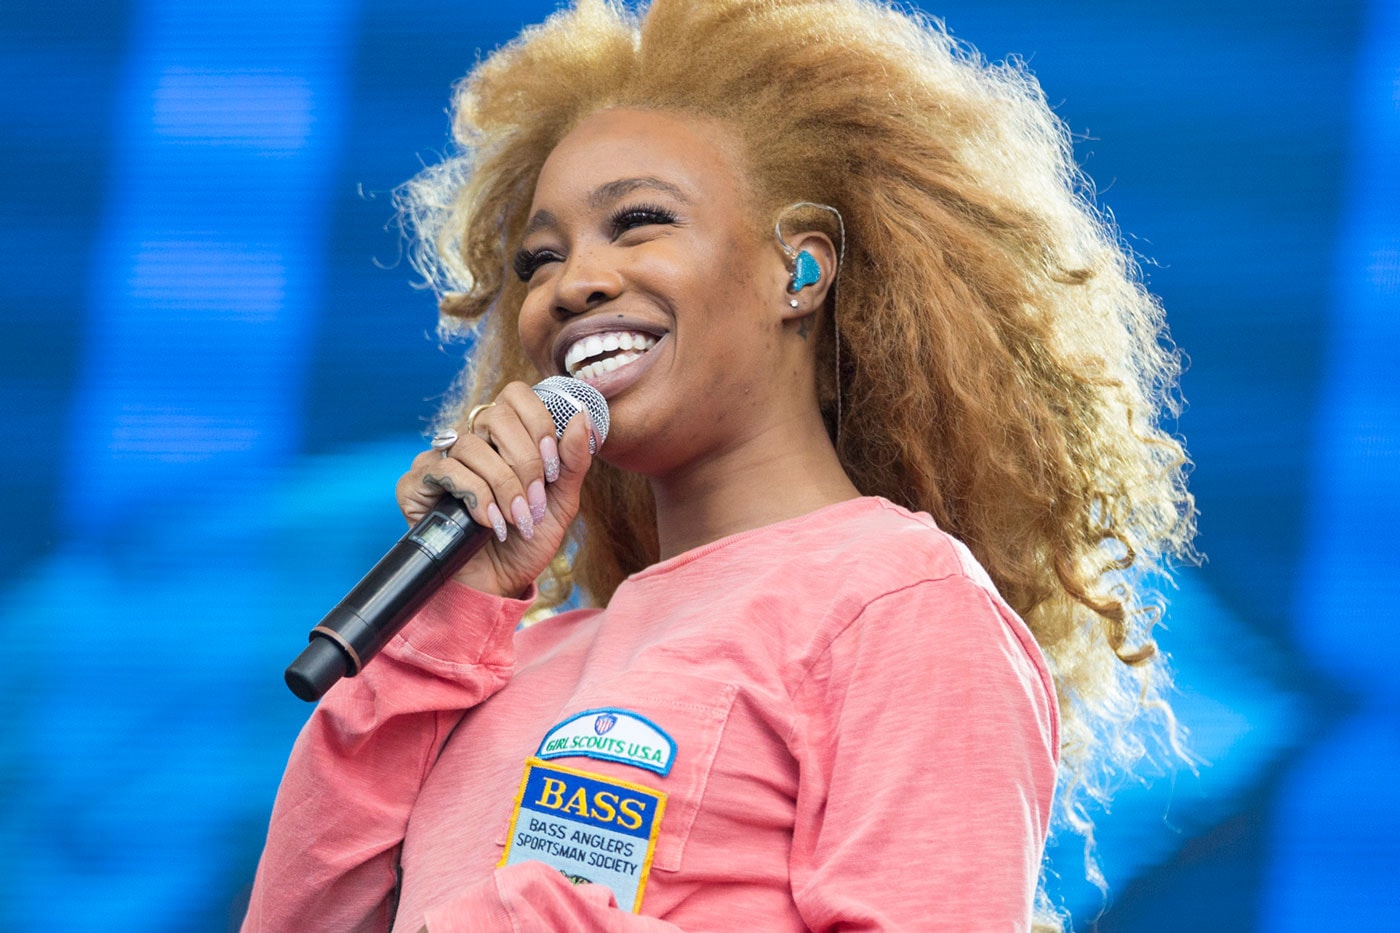 SZA “Roughed Up” by Philadelphia Police Over The Weekend